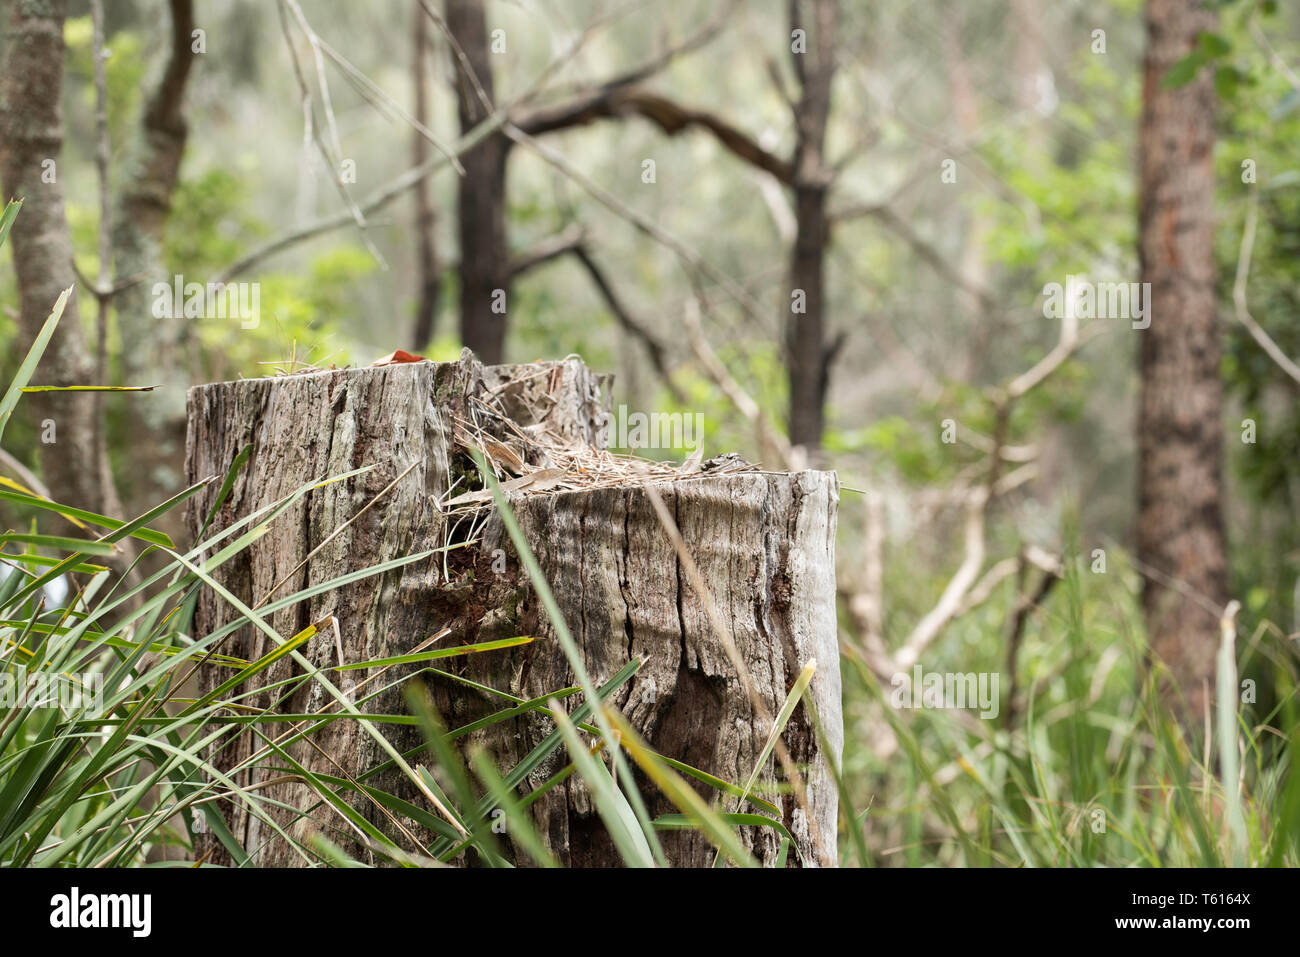 An old weathered tree stump of a Eucalyptus tree, probably a Spotted Gum (Corymbia maculata) in the NSW south coast town of Bawley Point Stock Photo